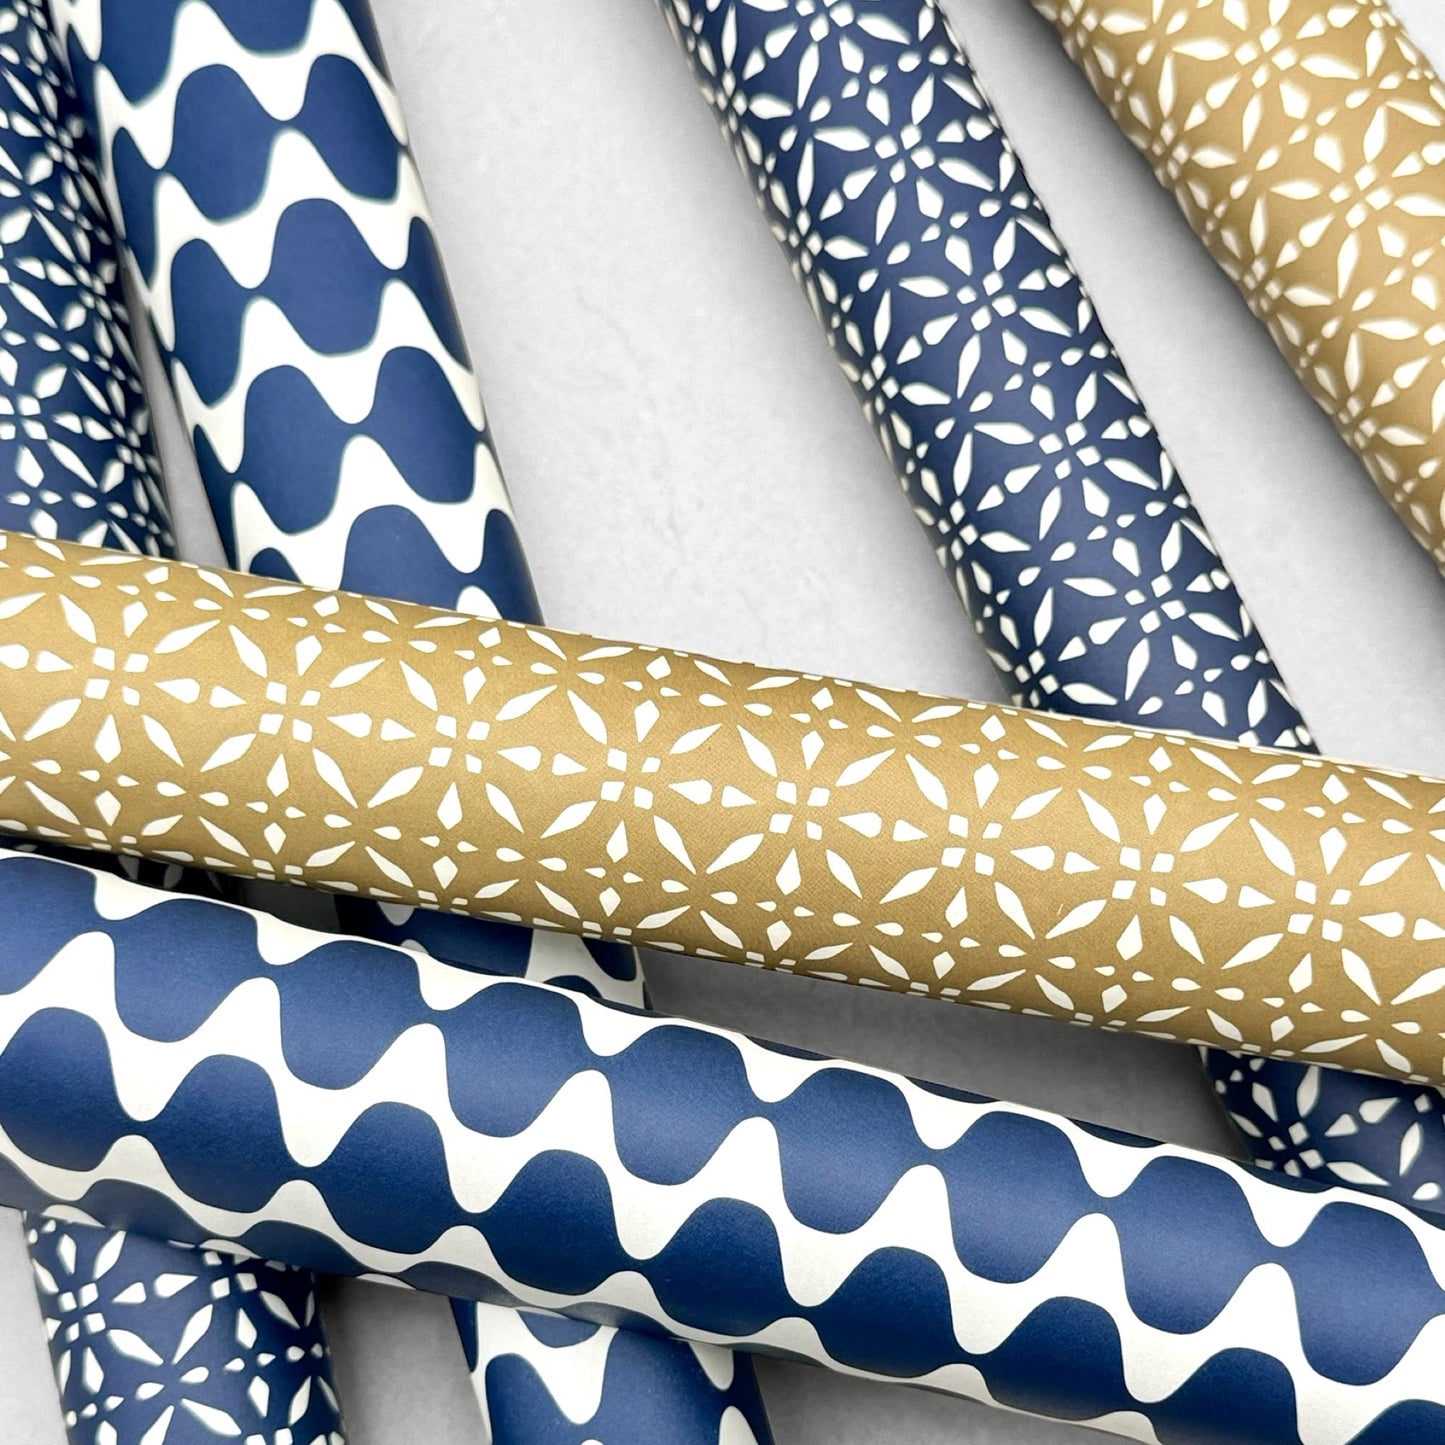 wrapping paper by Otto Editions with a cut-out design in white on a gold background. Pictured rolled alongside other designs